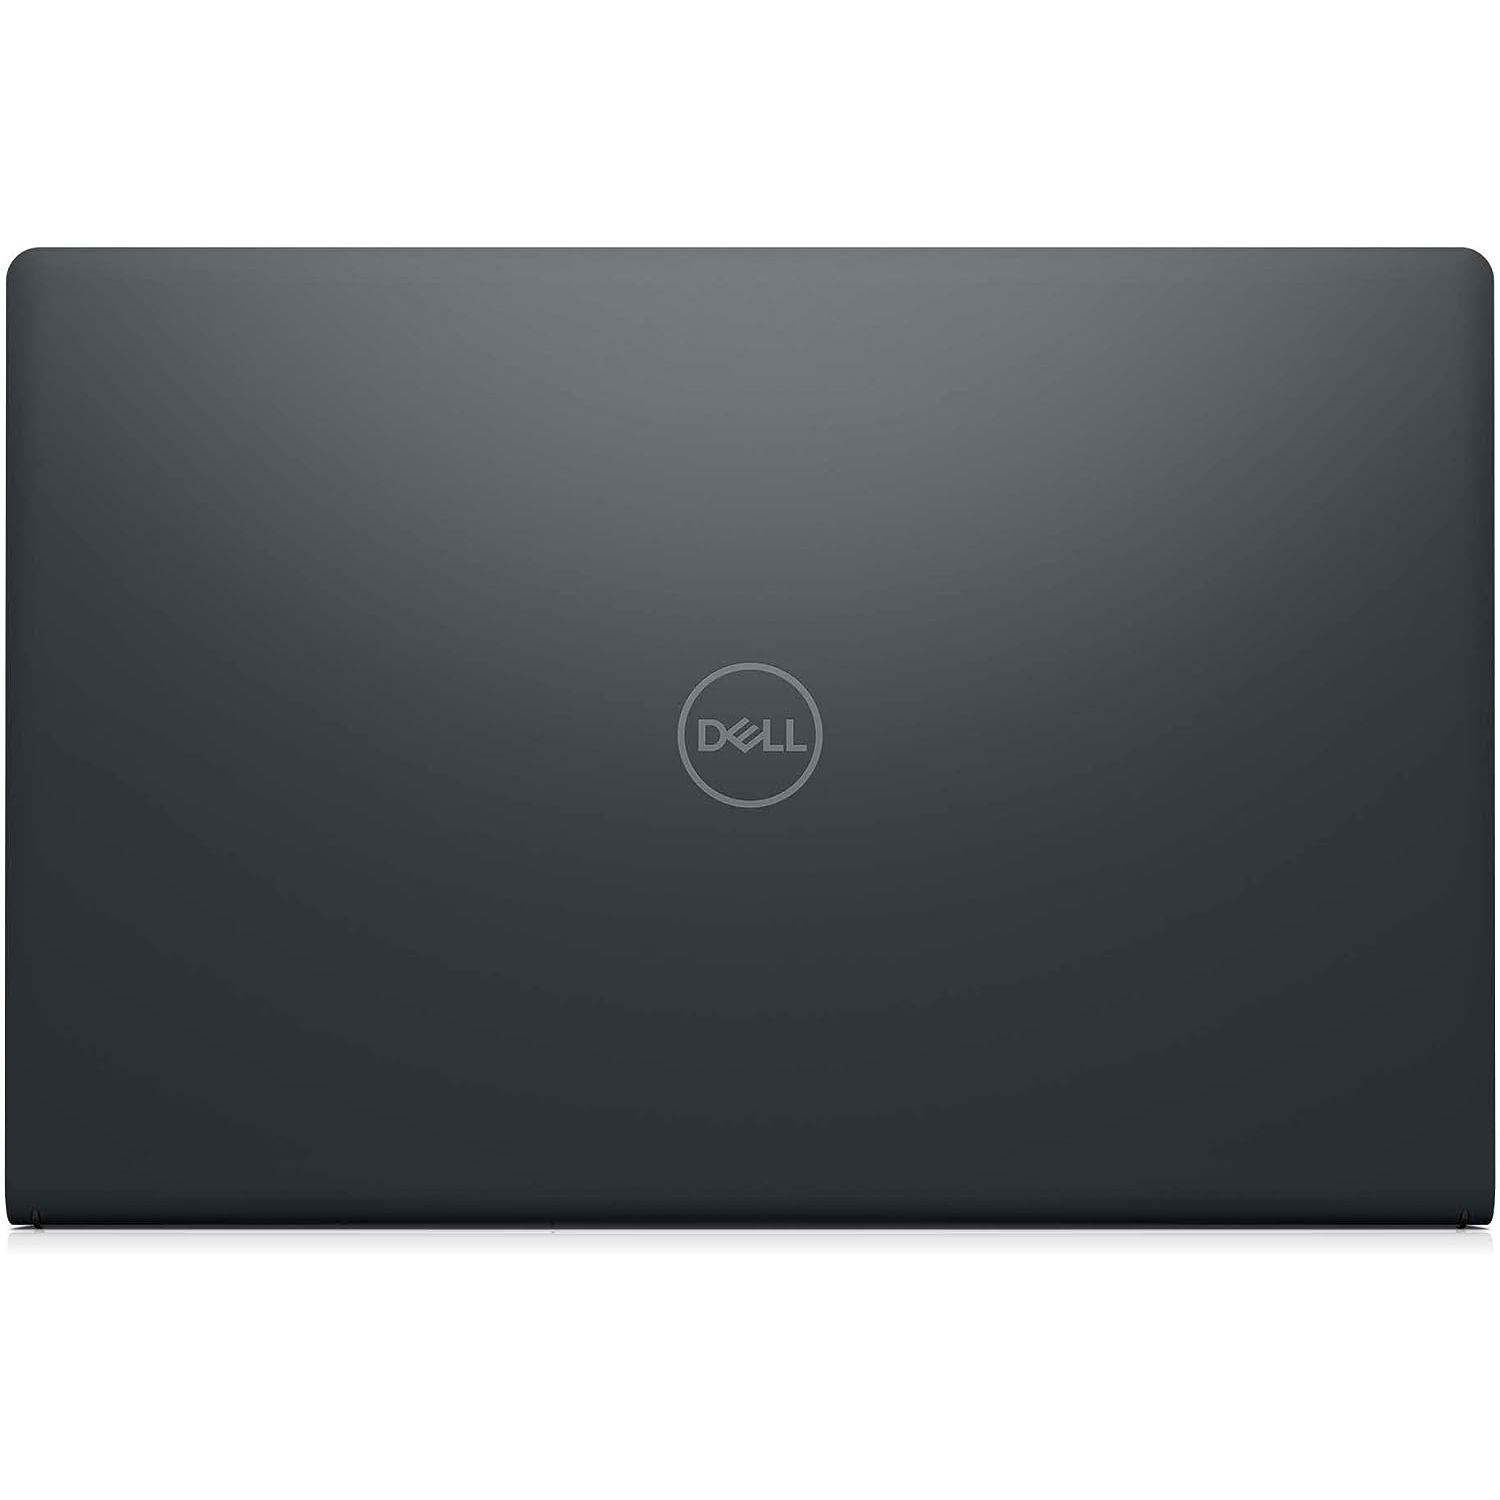 Refurbished (Excellent) – Dell Inspiron 15 3520 Laptop | 15.6" FHD | Core i7 - 512GB SSD - 16GB RAM | Intel Cores @ 120 Hz - 12th Gen CPU | Iris Xe Graphics | Windows 11 Home